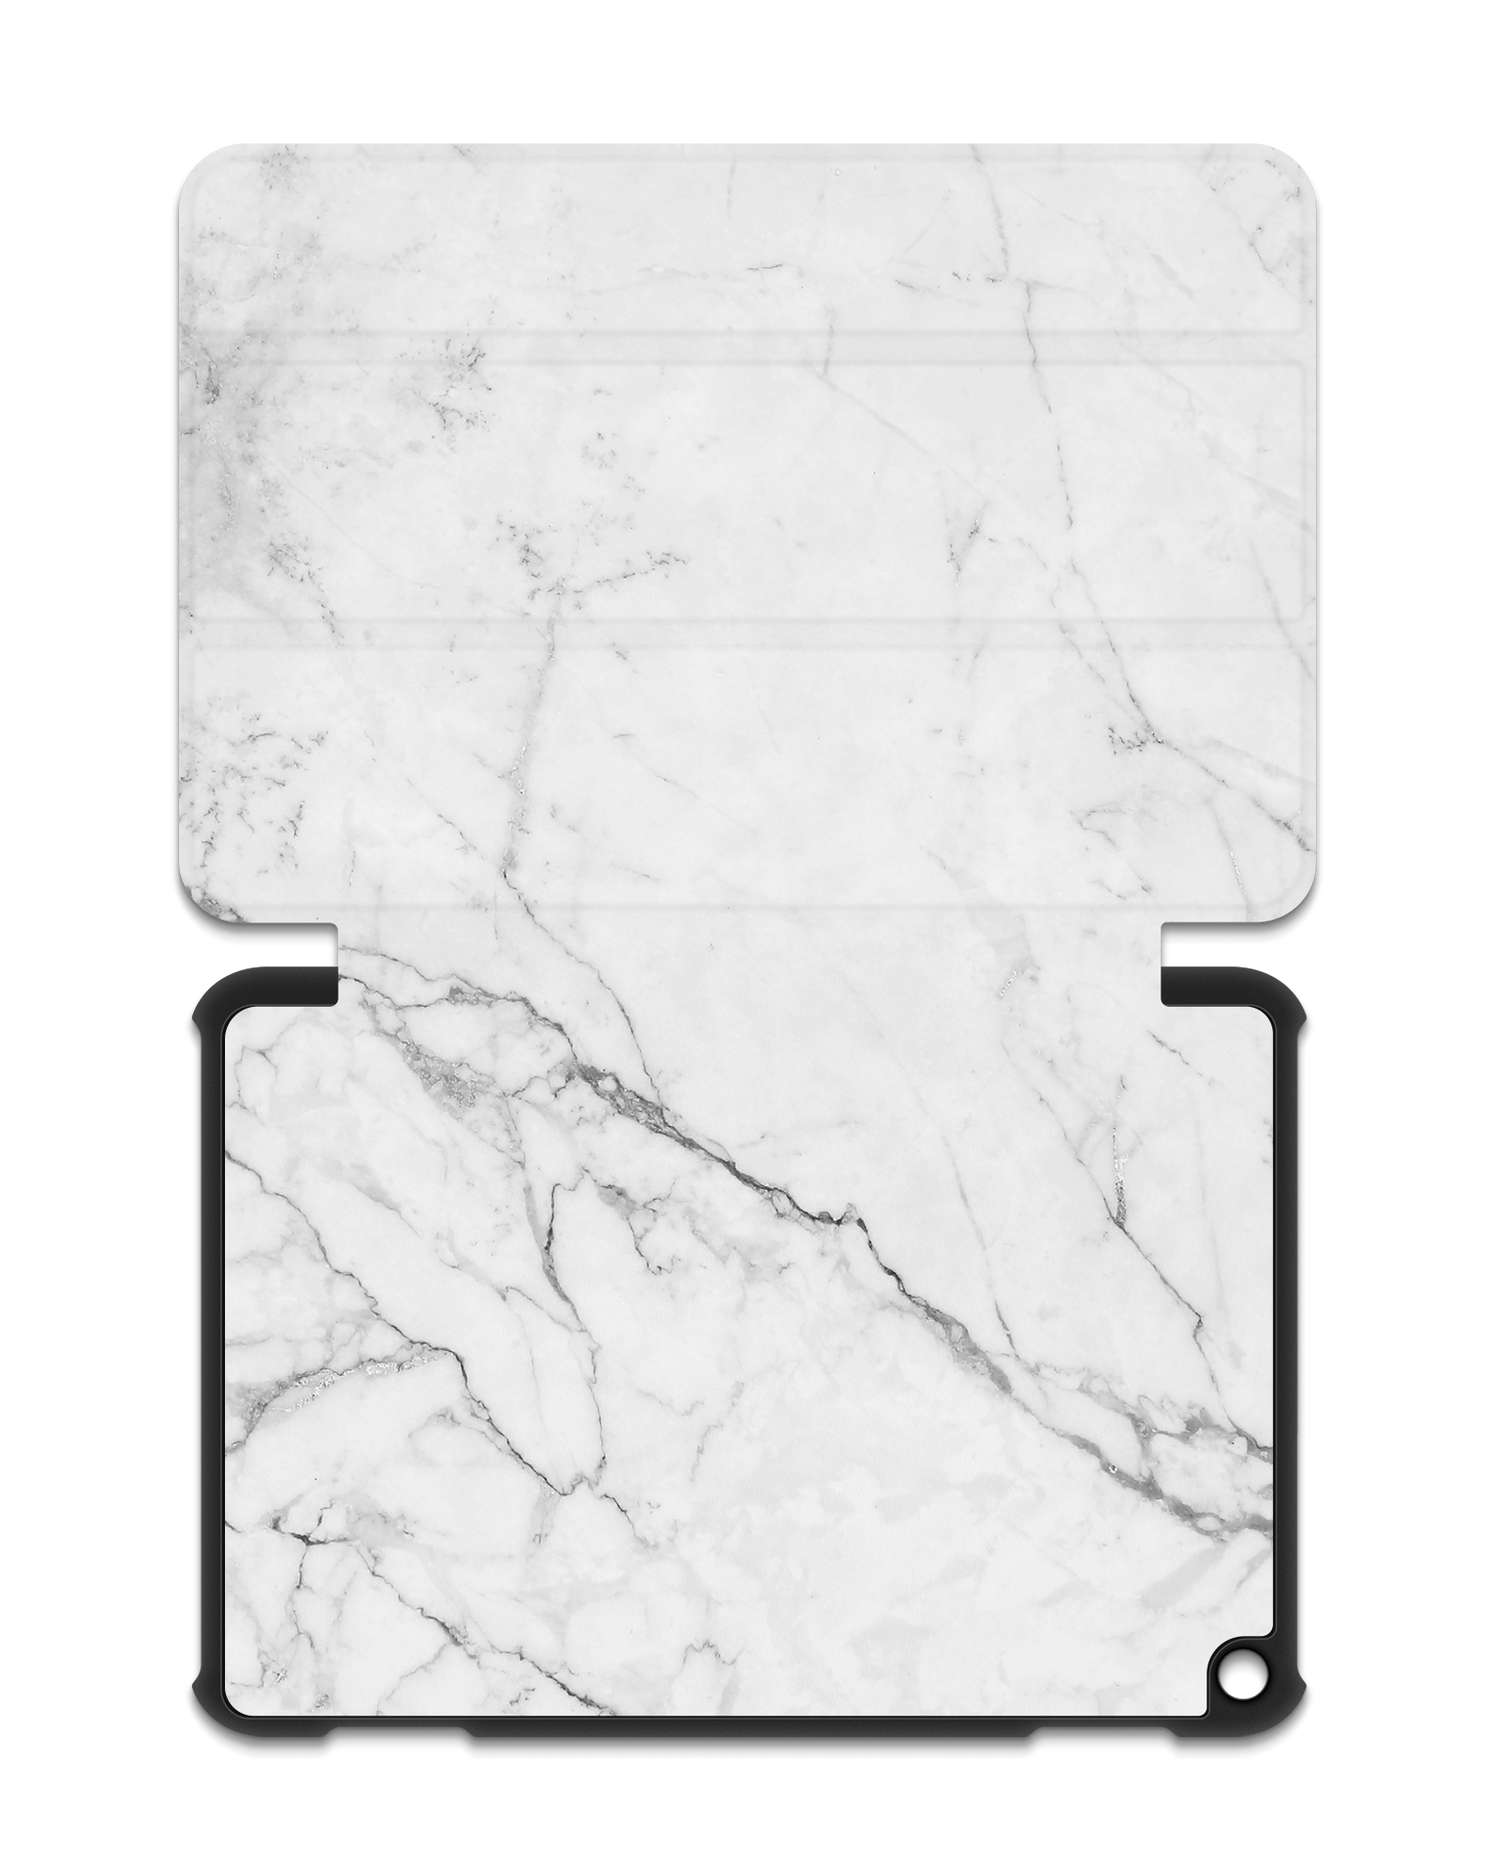 White Marble Tablet Smart Case for Amazon Fire HD 8 (2022), Amazon Fire HD 8 Plus (2022), Amazon Fire HD 8 (2020), Amazon Fire HD 8 Plus (2020): Opened